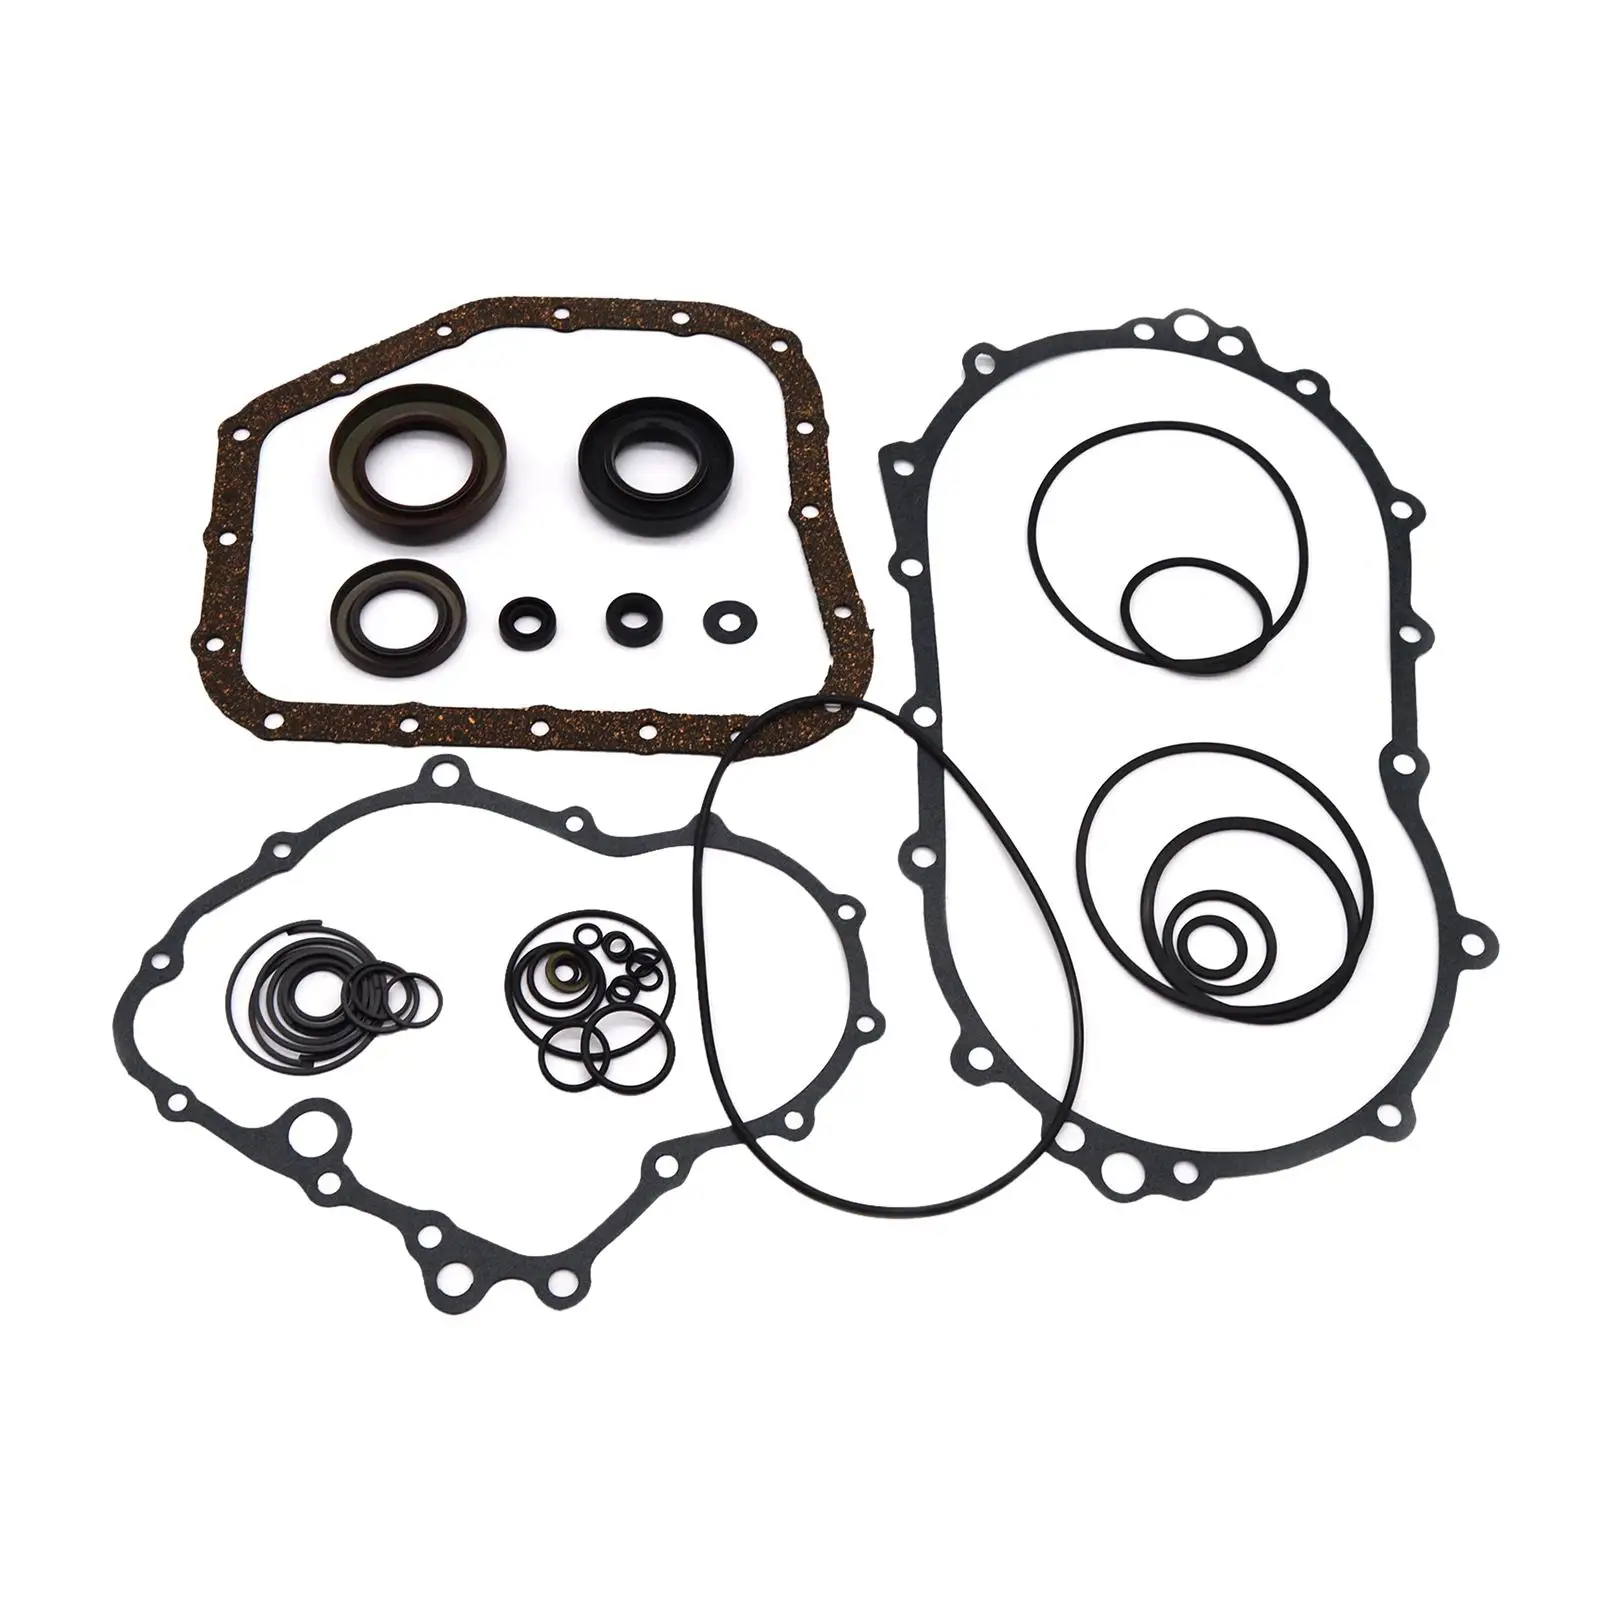 

Automatic Transmission Rebuild Kit Transmission Repair Kit JL-4AT-1A Overhaul Fit for Geely- Oil Seals Cushion Rubber